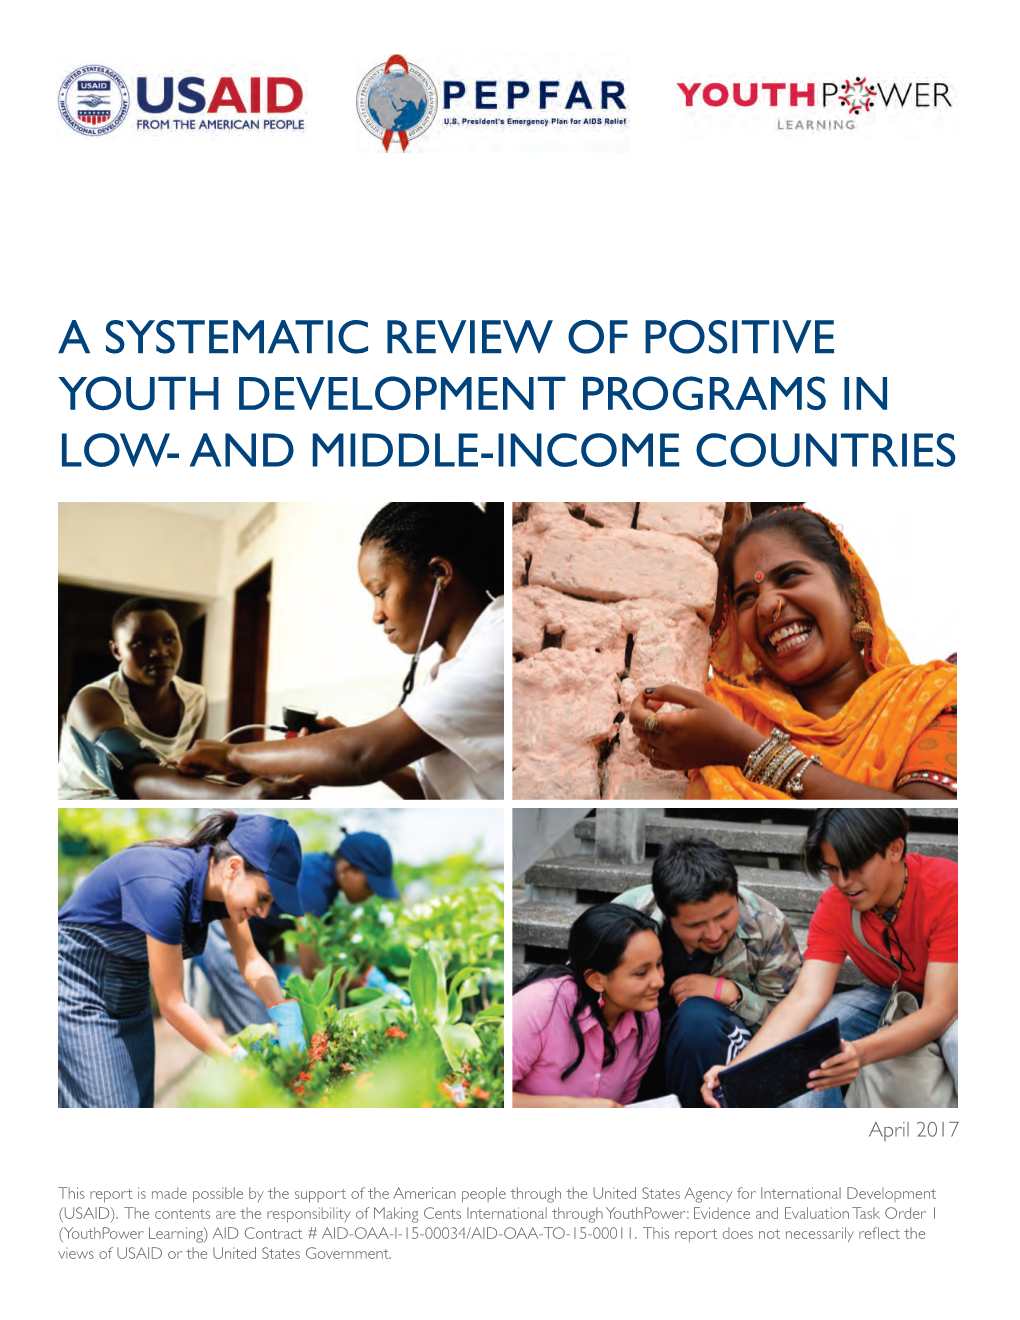 A Systematic Review of Positive Youth Development Programs in Low- and Middle-Income Countries